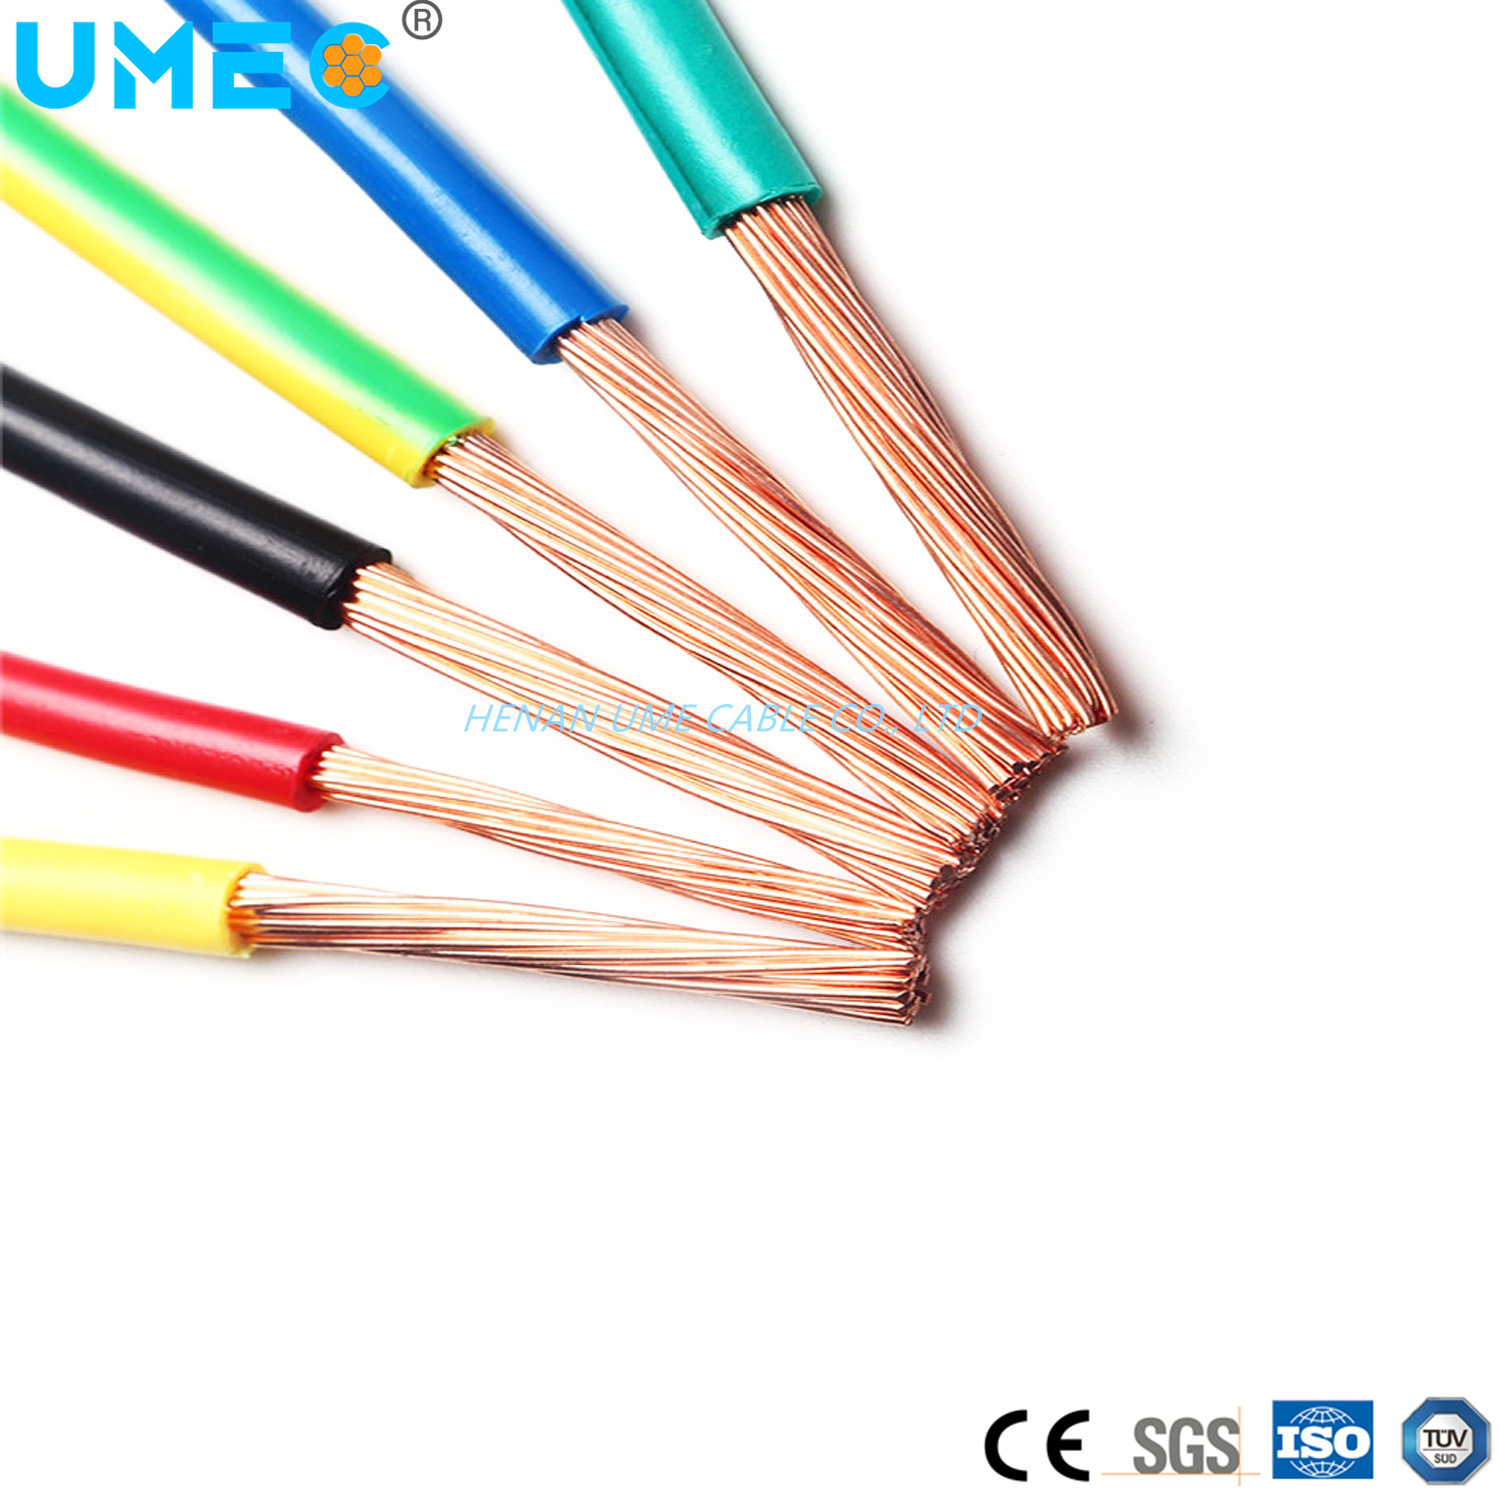 General Purpose 450/750V 14 Gauge 12gauge 10 Gauge Copper Conductor Insulated Blue Black Green Yellow Green-Yellow Red White Bvr